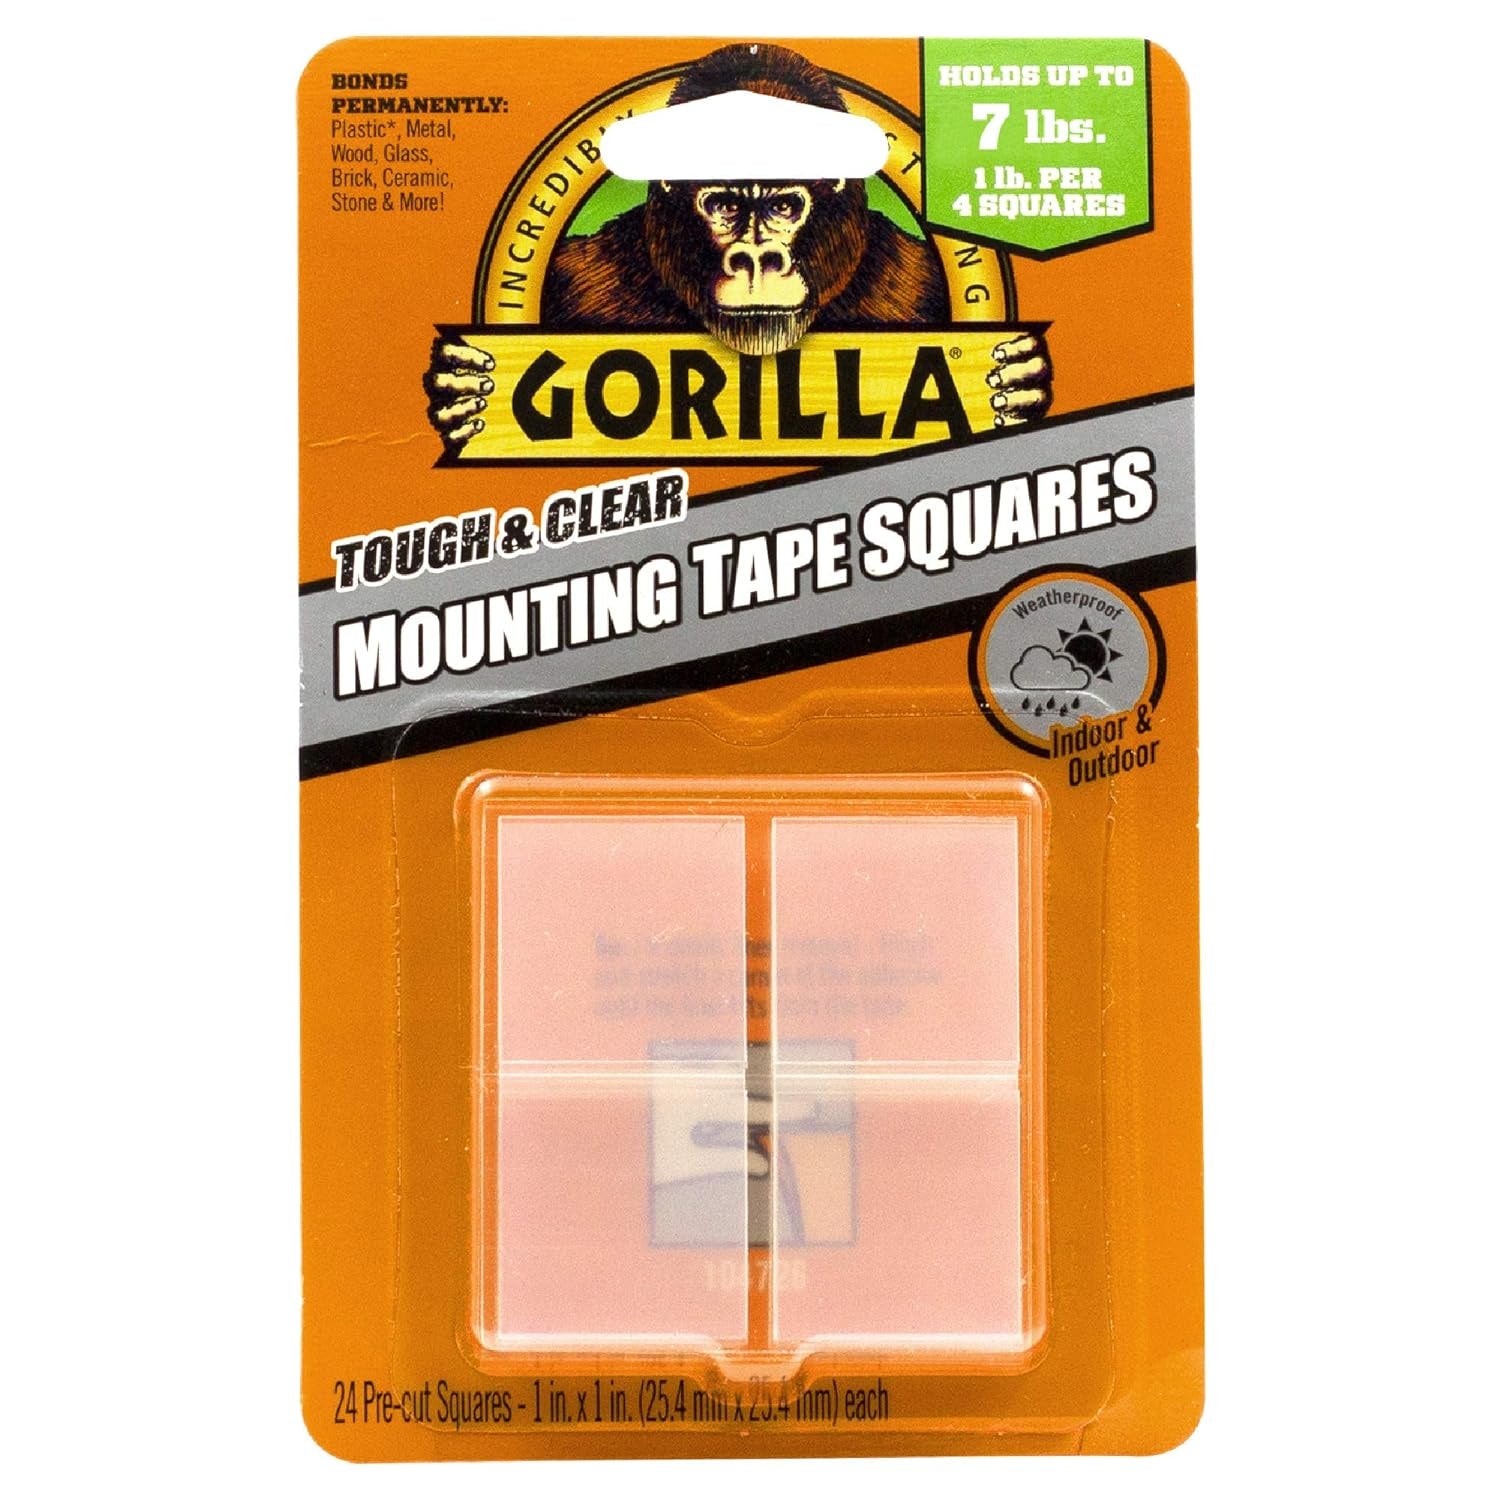 Gorilla Tough & Clear Double Sided Tape Squares, 24 1"  Squares - (Pack of 1)